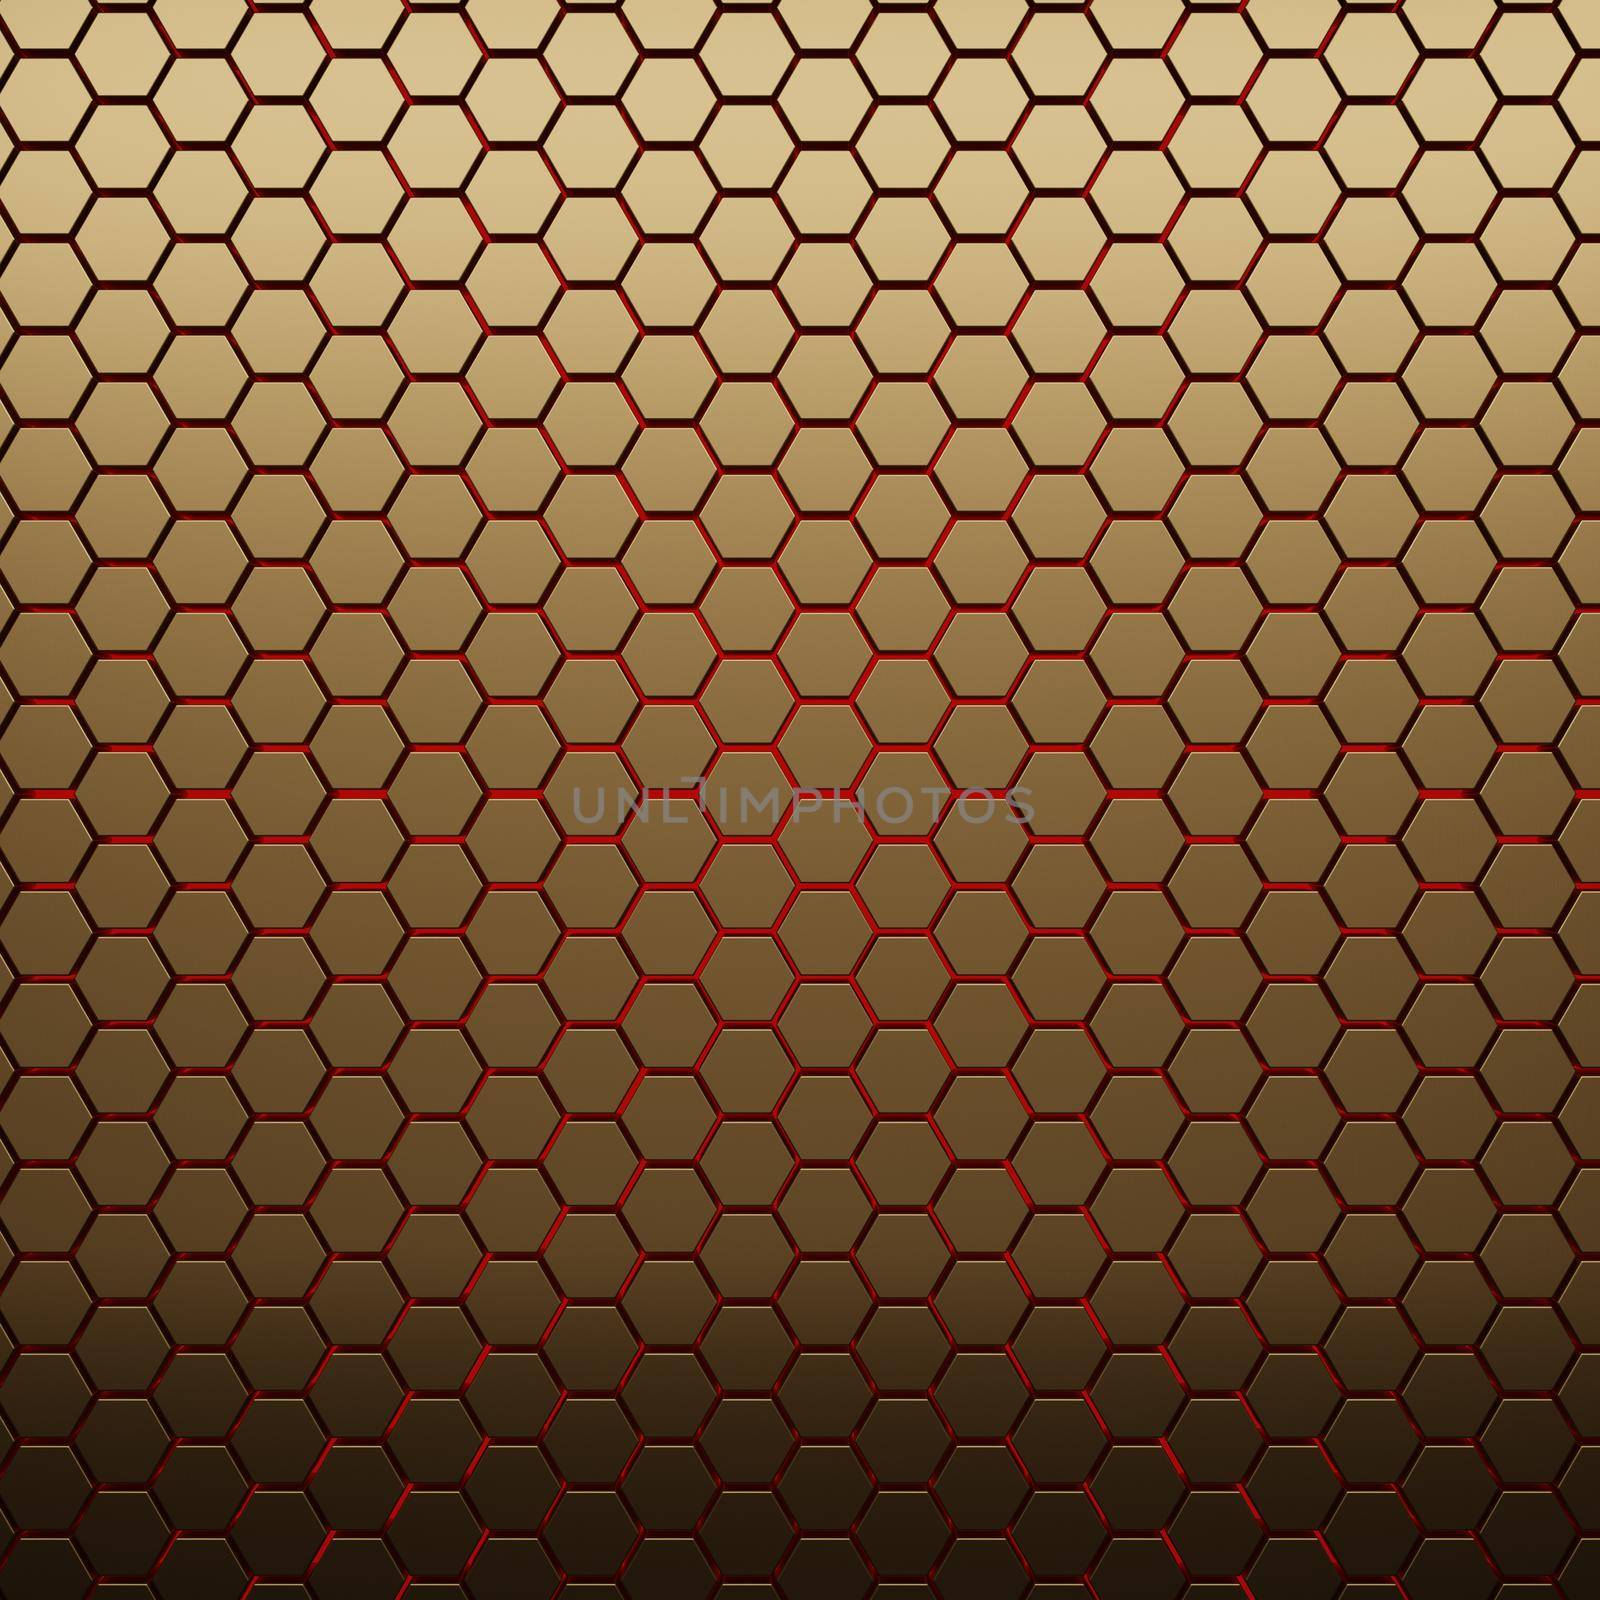 Futuristic gold hexagonal texture background. 3d rendering by Taut